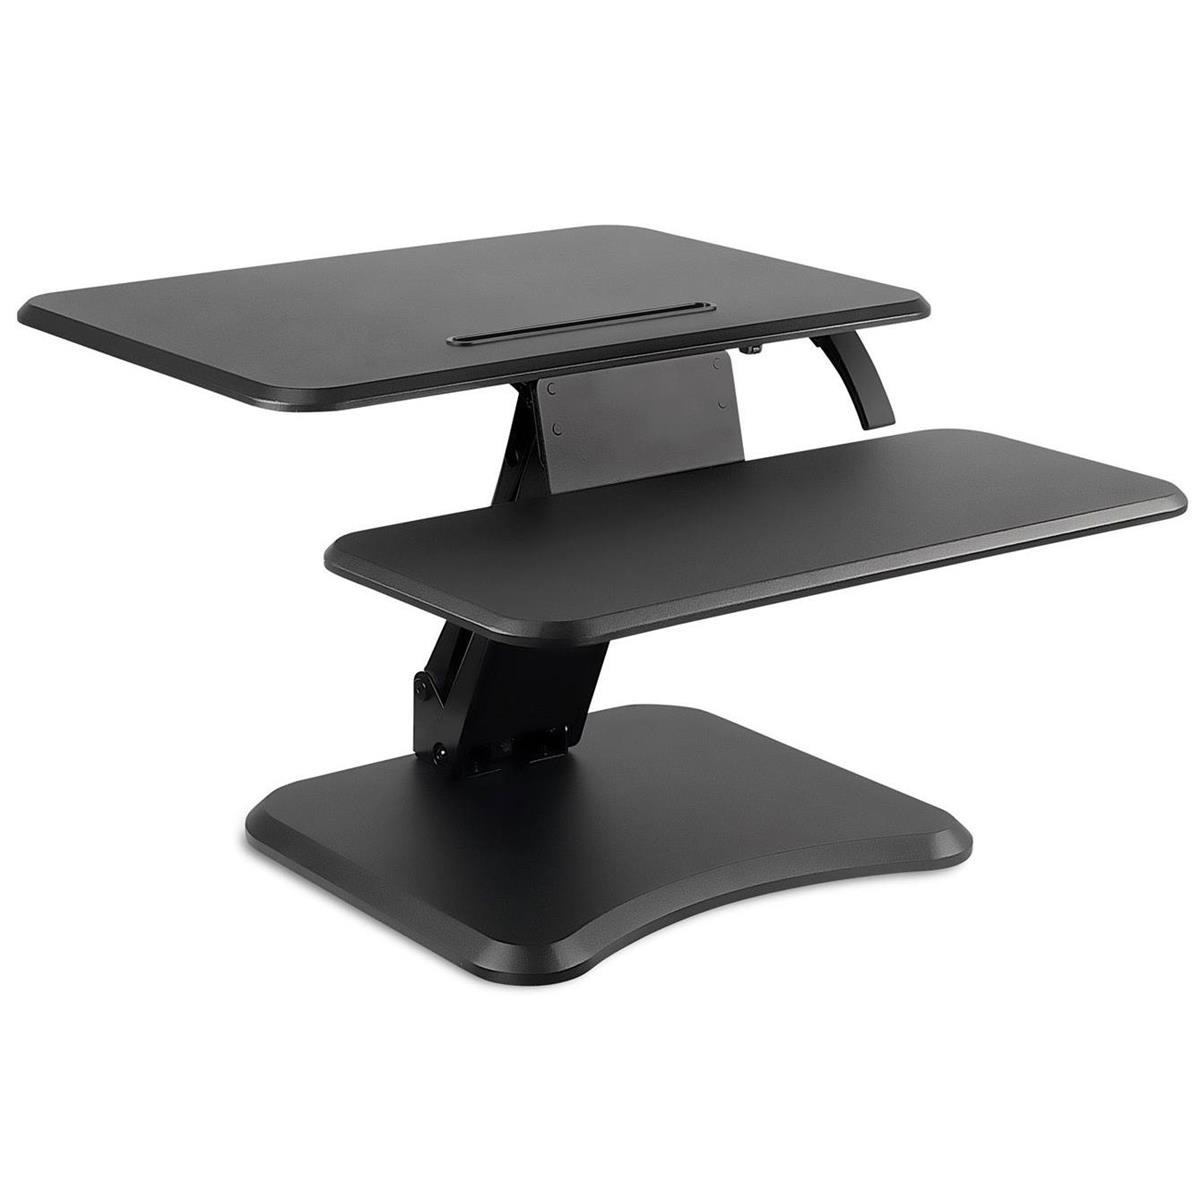 

Mount-It! MI-7957 Tabletop Sit Stand Desk with Keyboard Tray